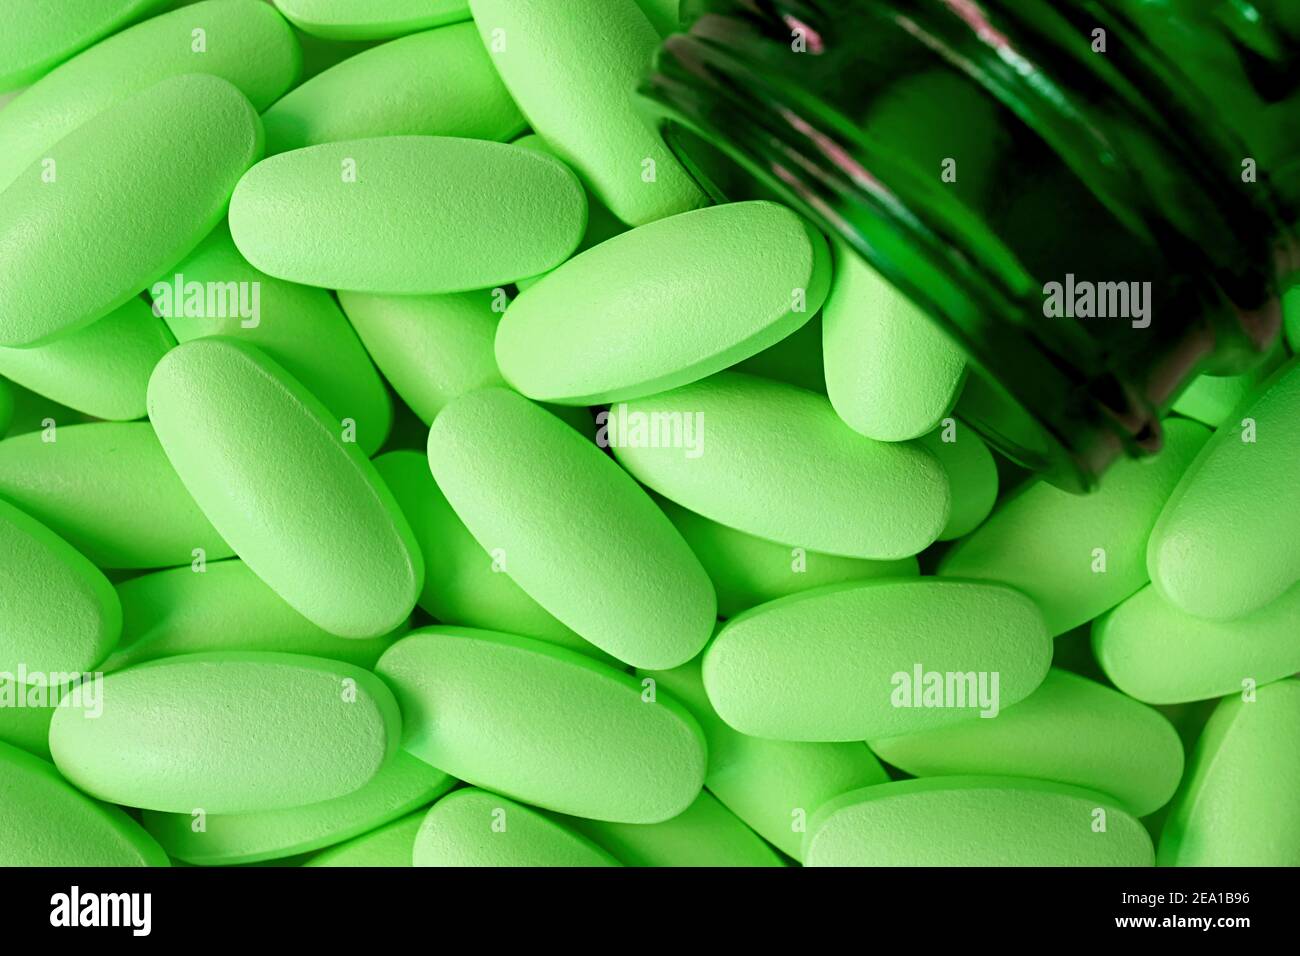 Top view of Lime green tablets poured from dark color glass bottle Stock Photo